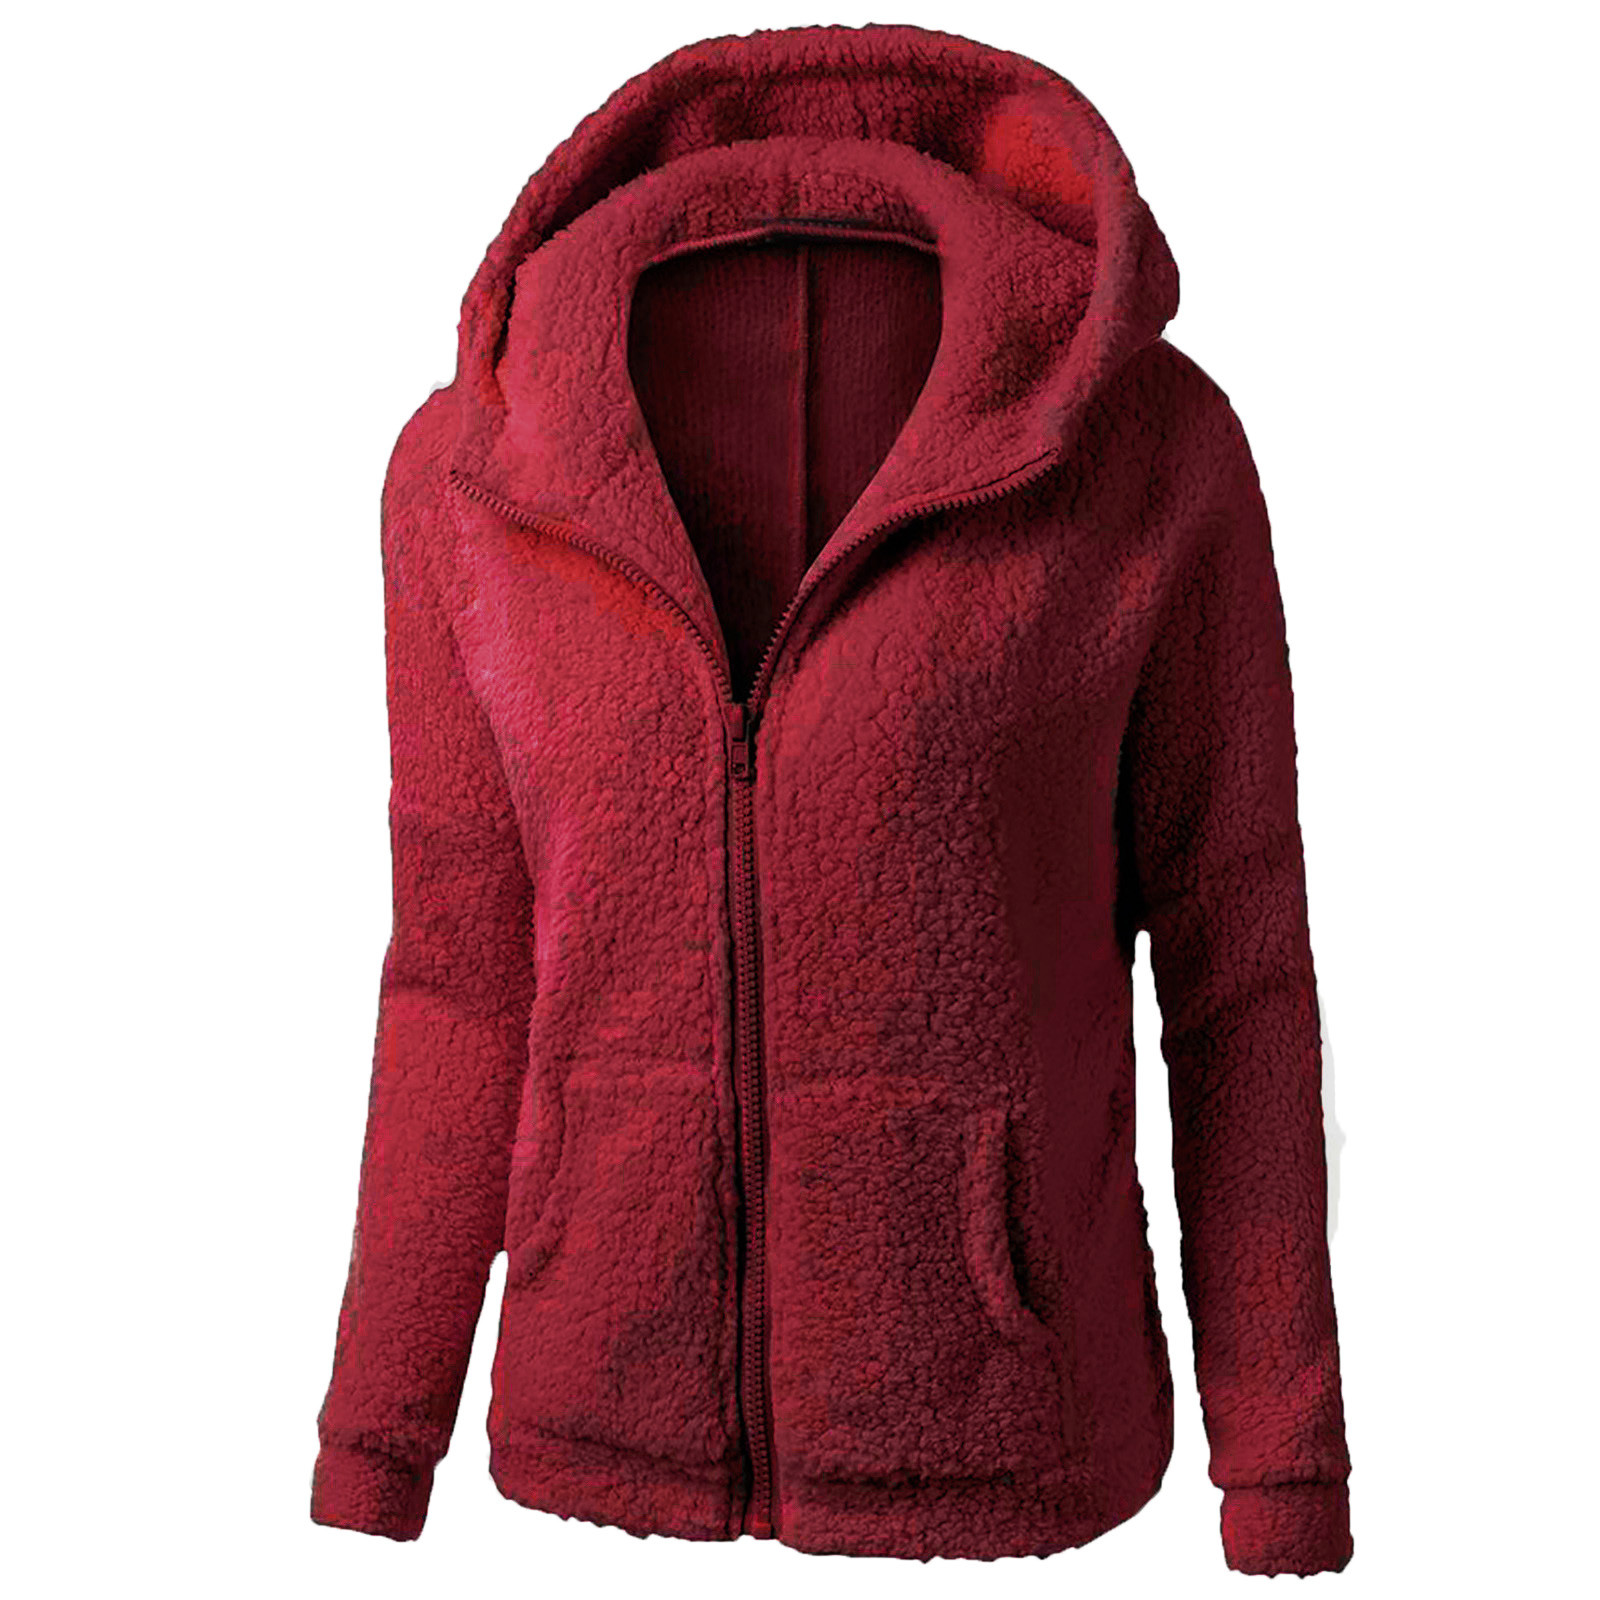 Jacenvly Womens Winter Coats Clearance Soft Warm Plush Jackets for ...